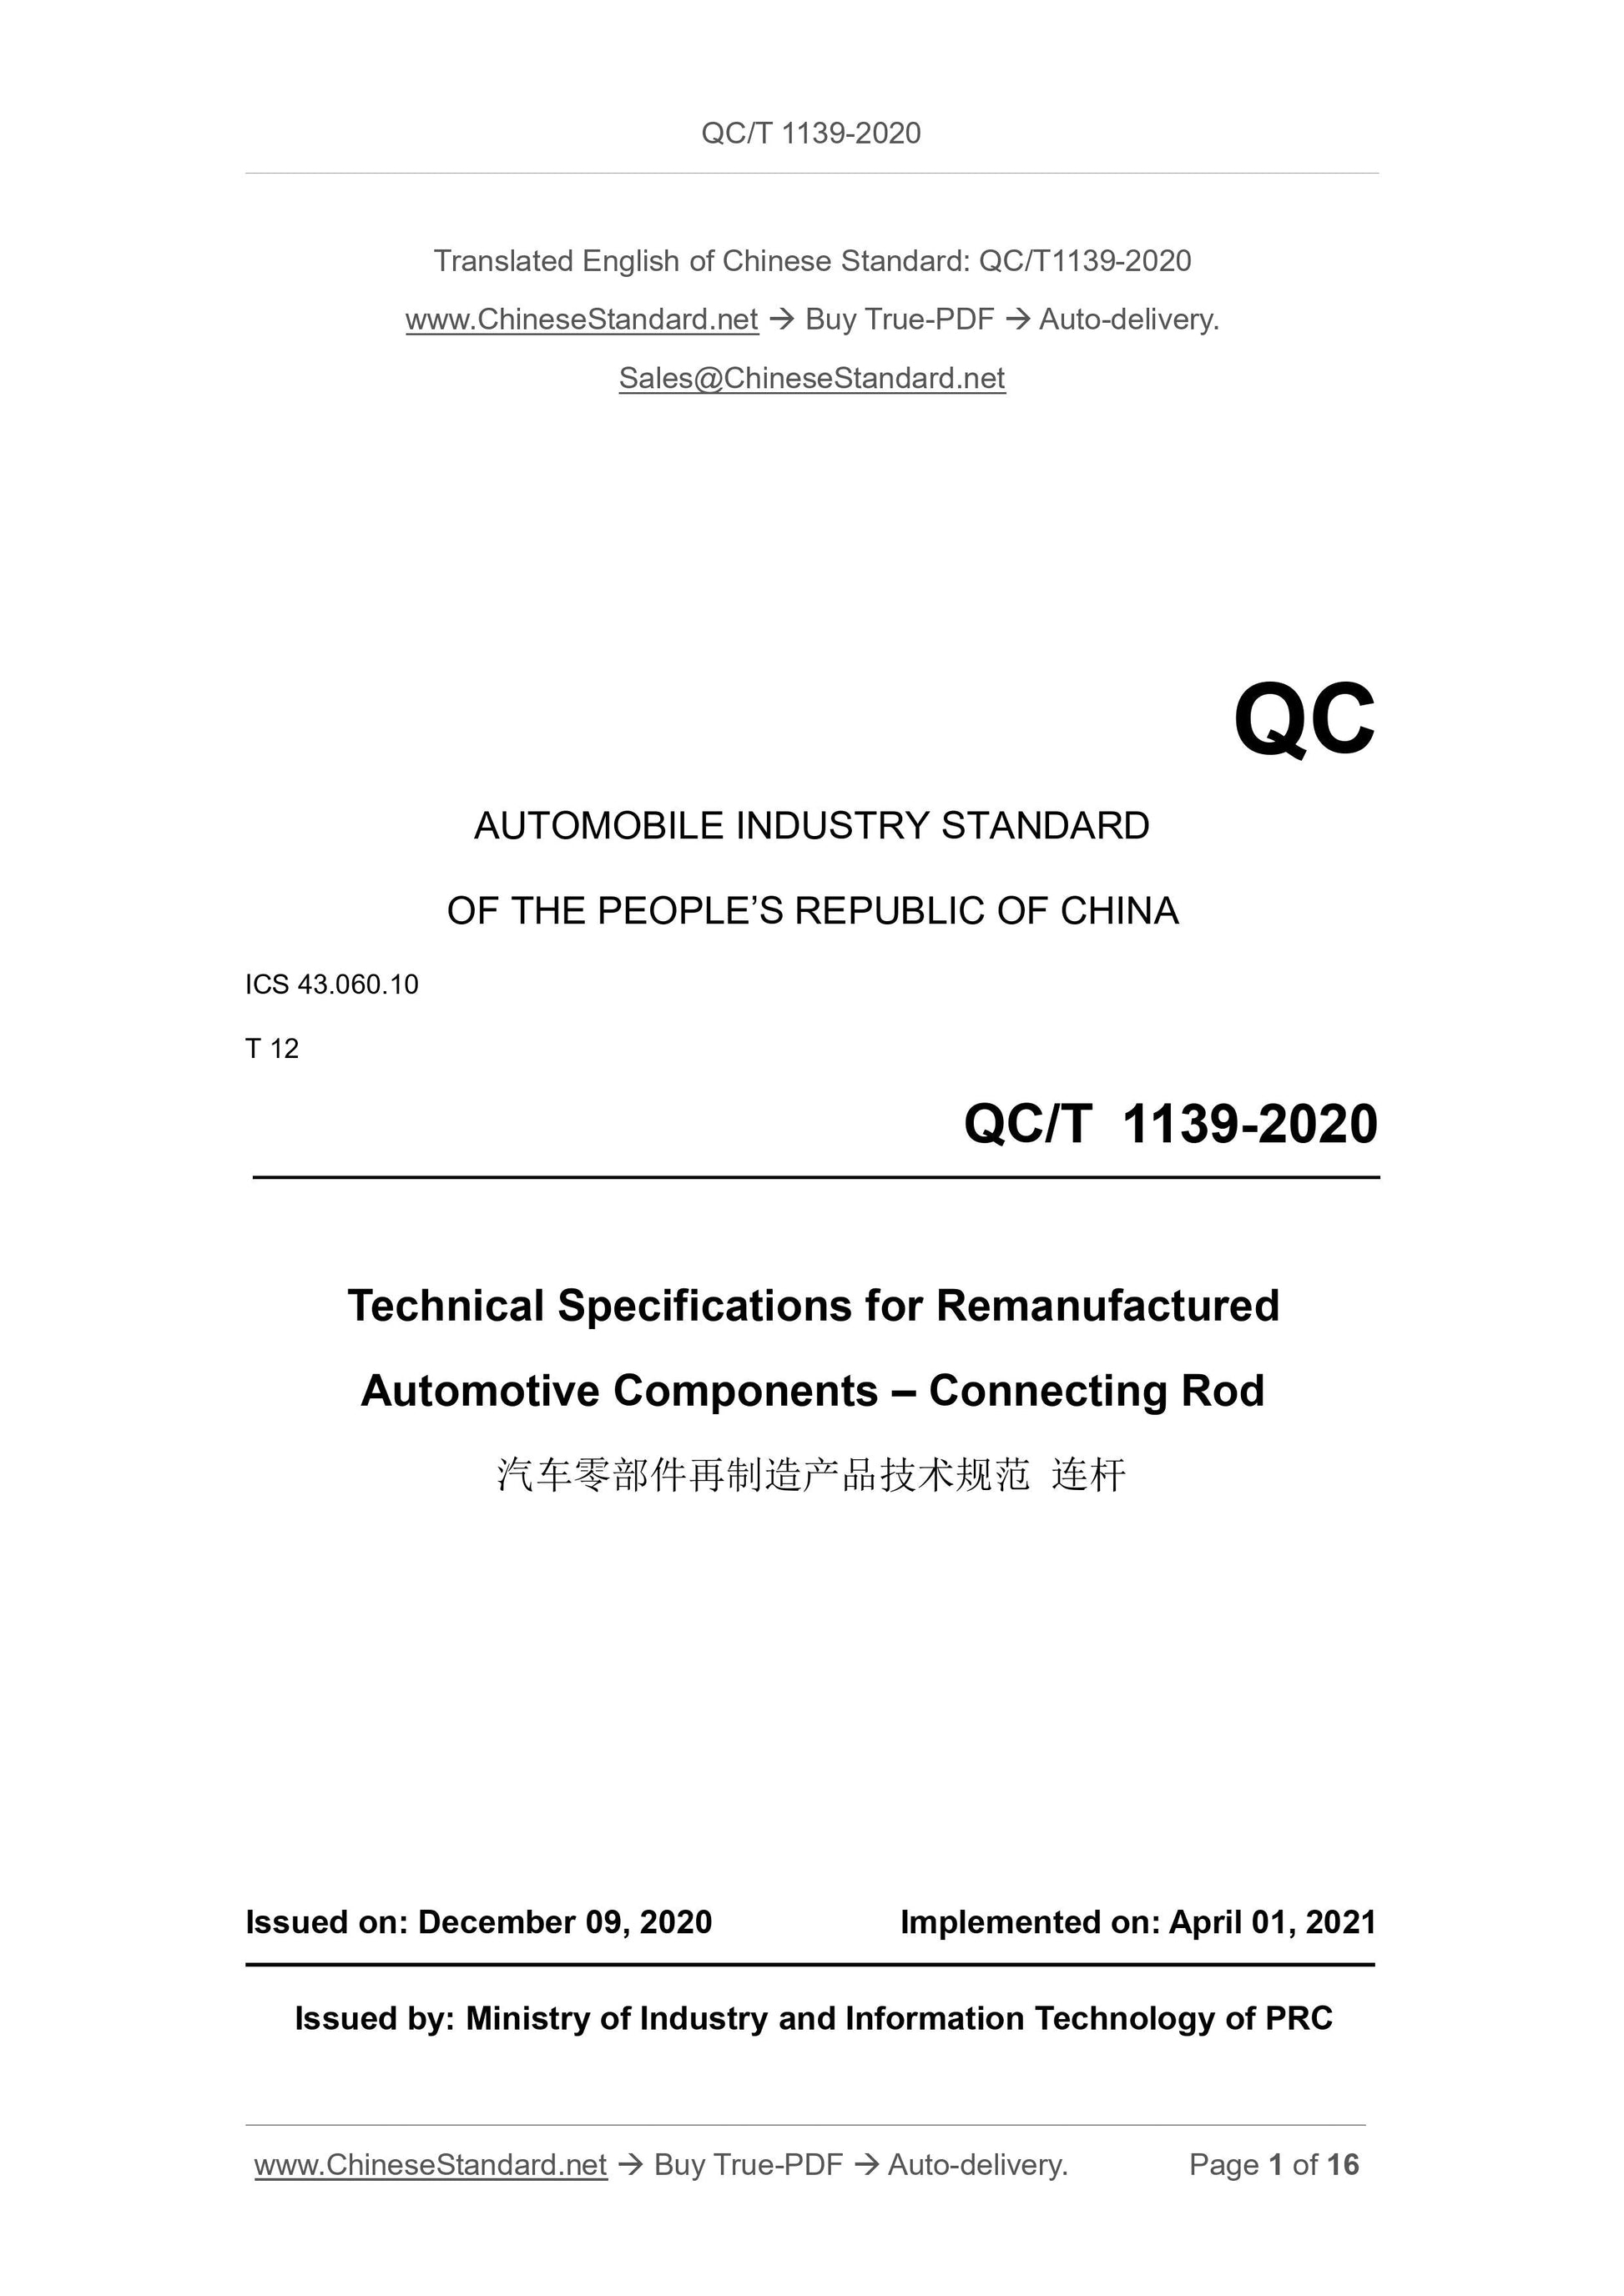 QC/T 1139-2020 Page 1